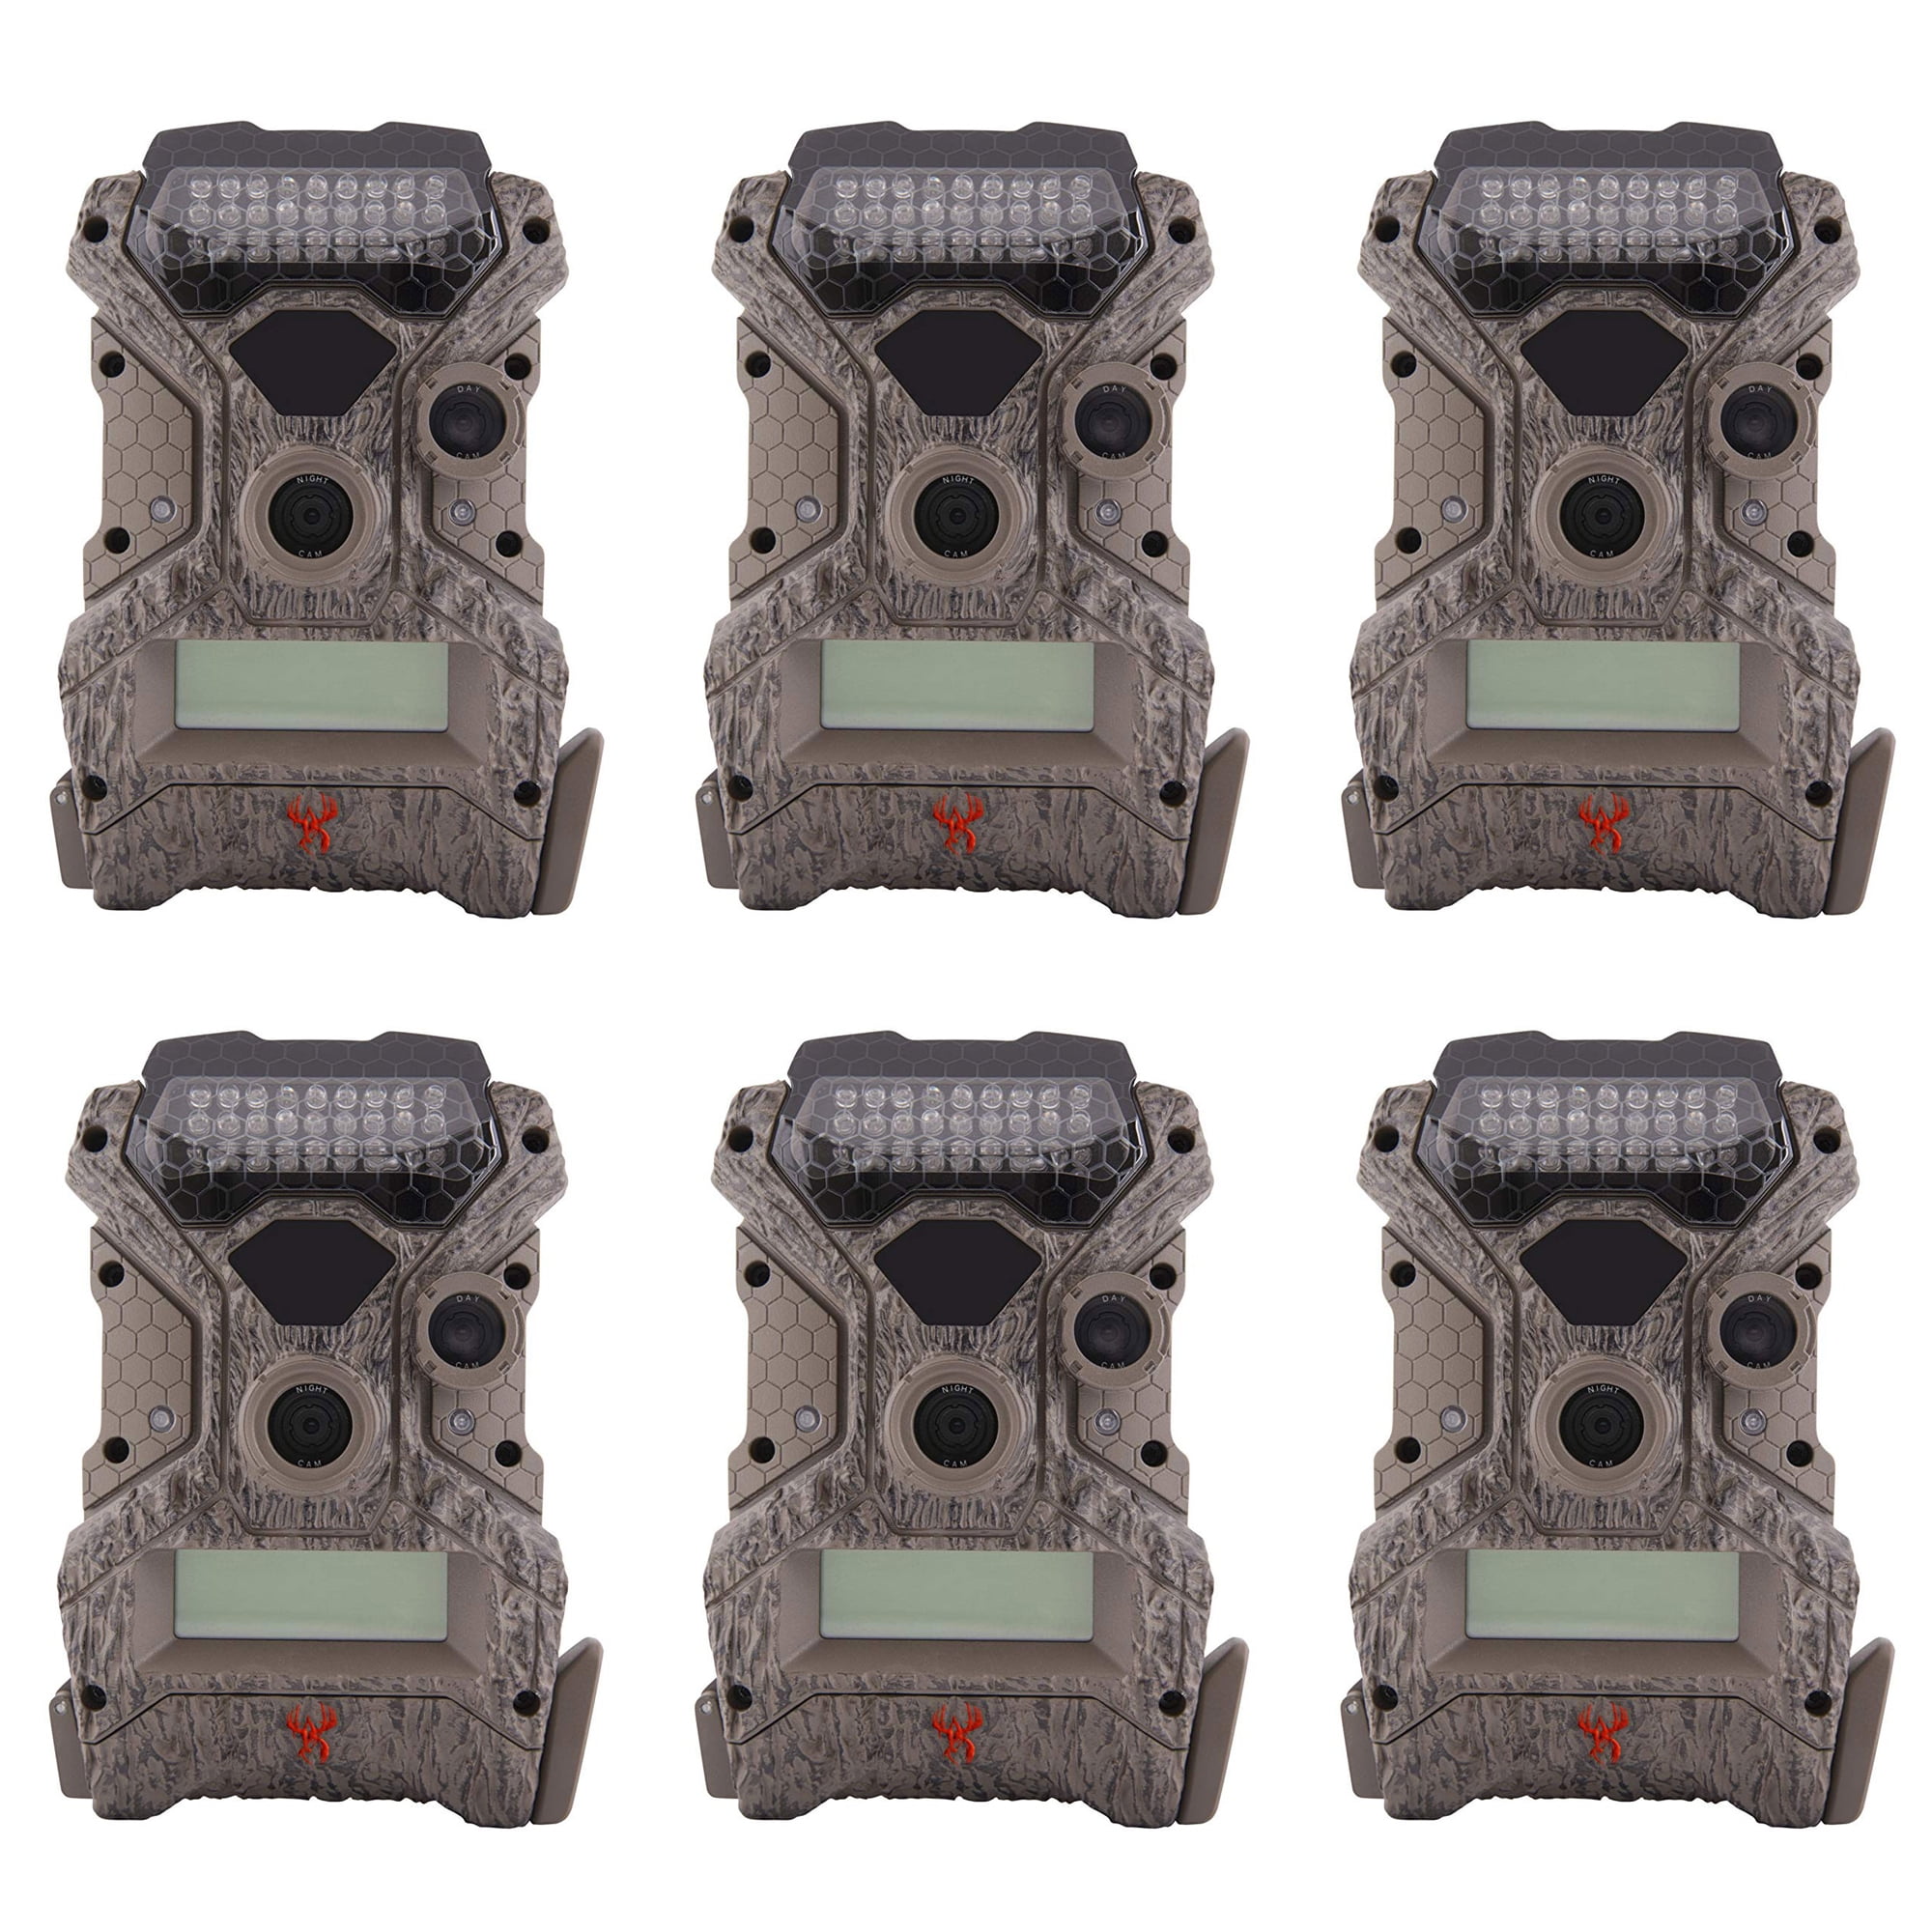 Wildgame Innovations Mirage No Glow 18 MP Hunting Trail Game Camera 2 Pack 